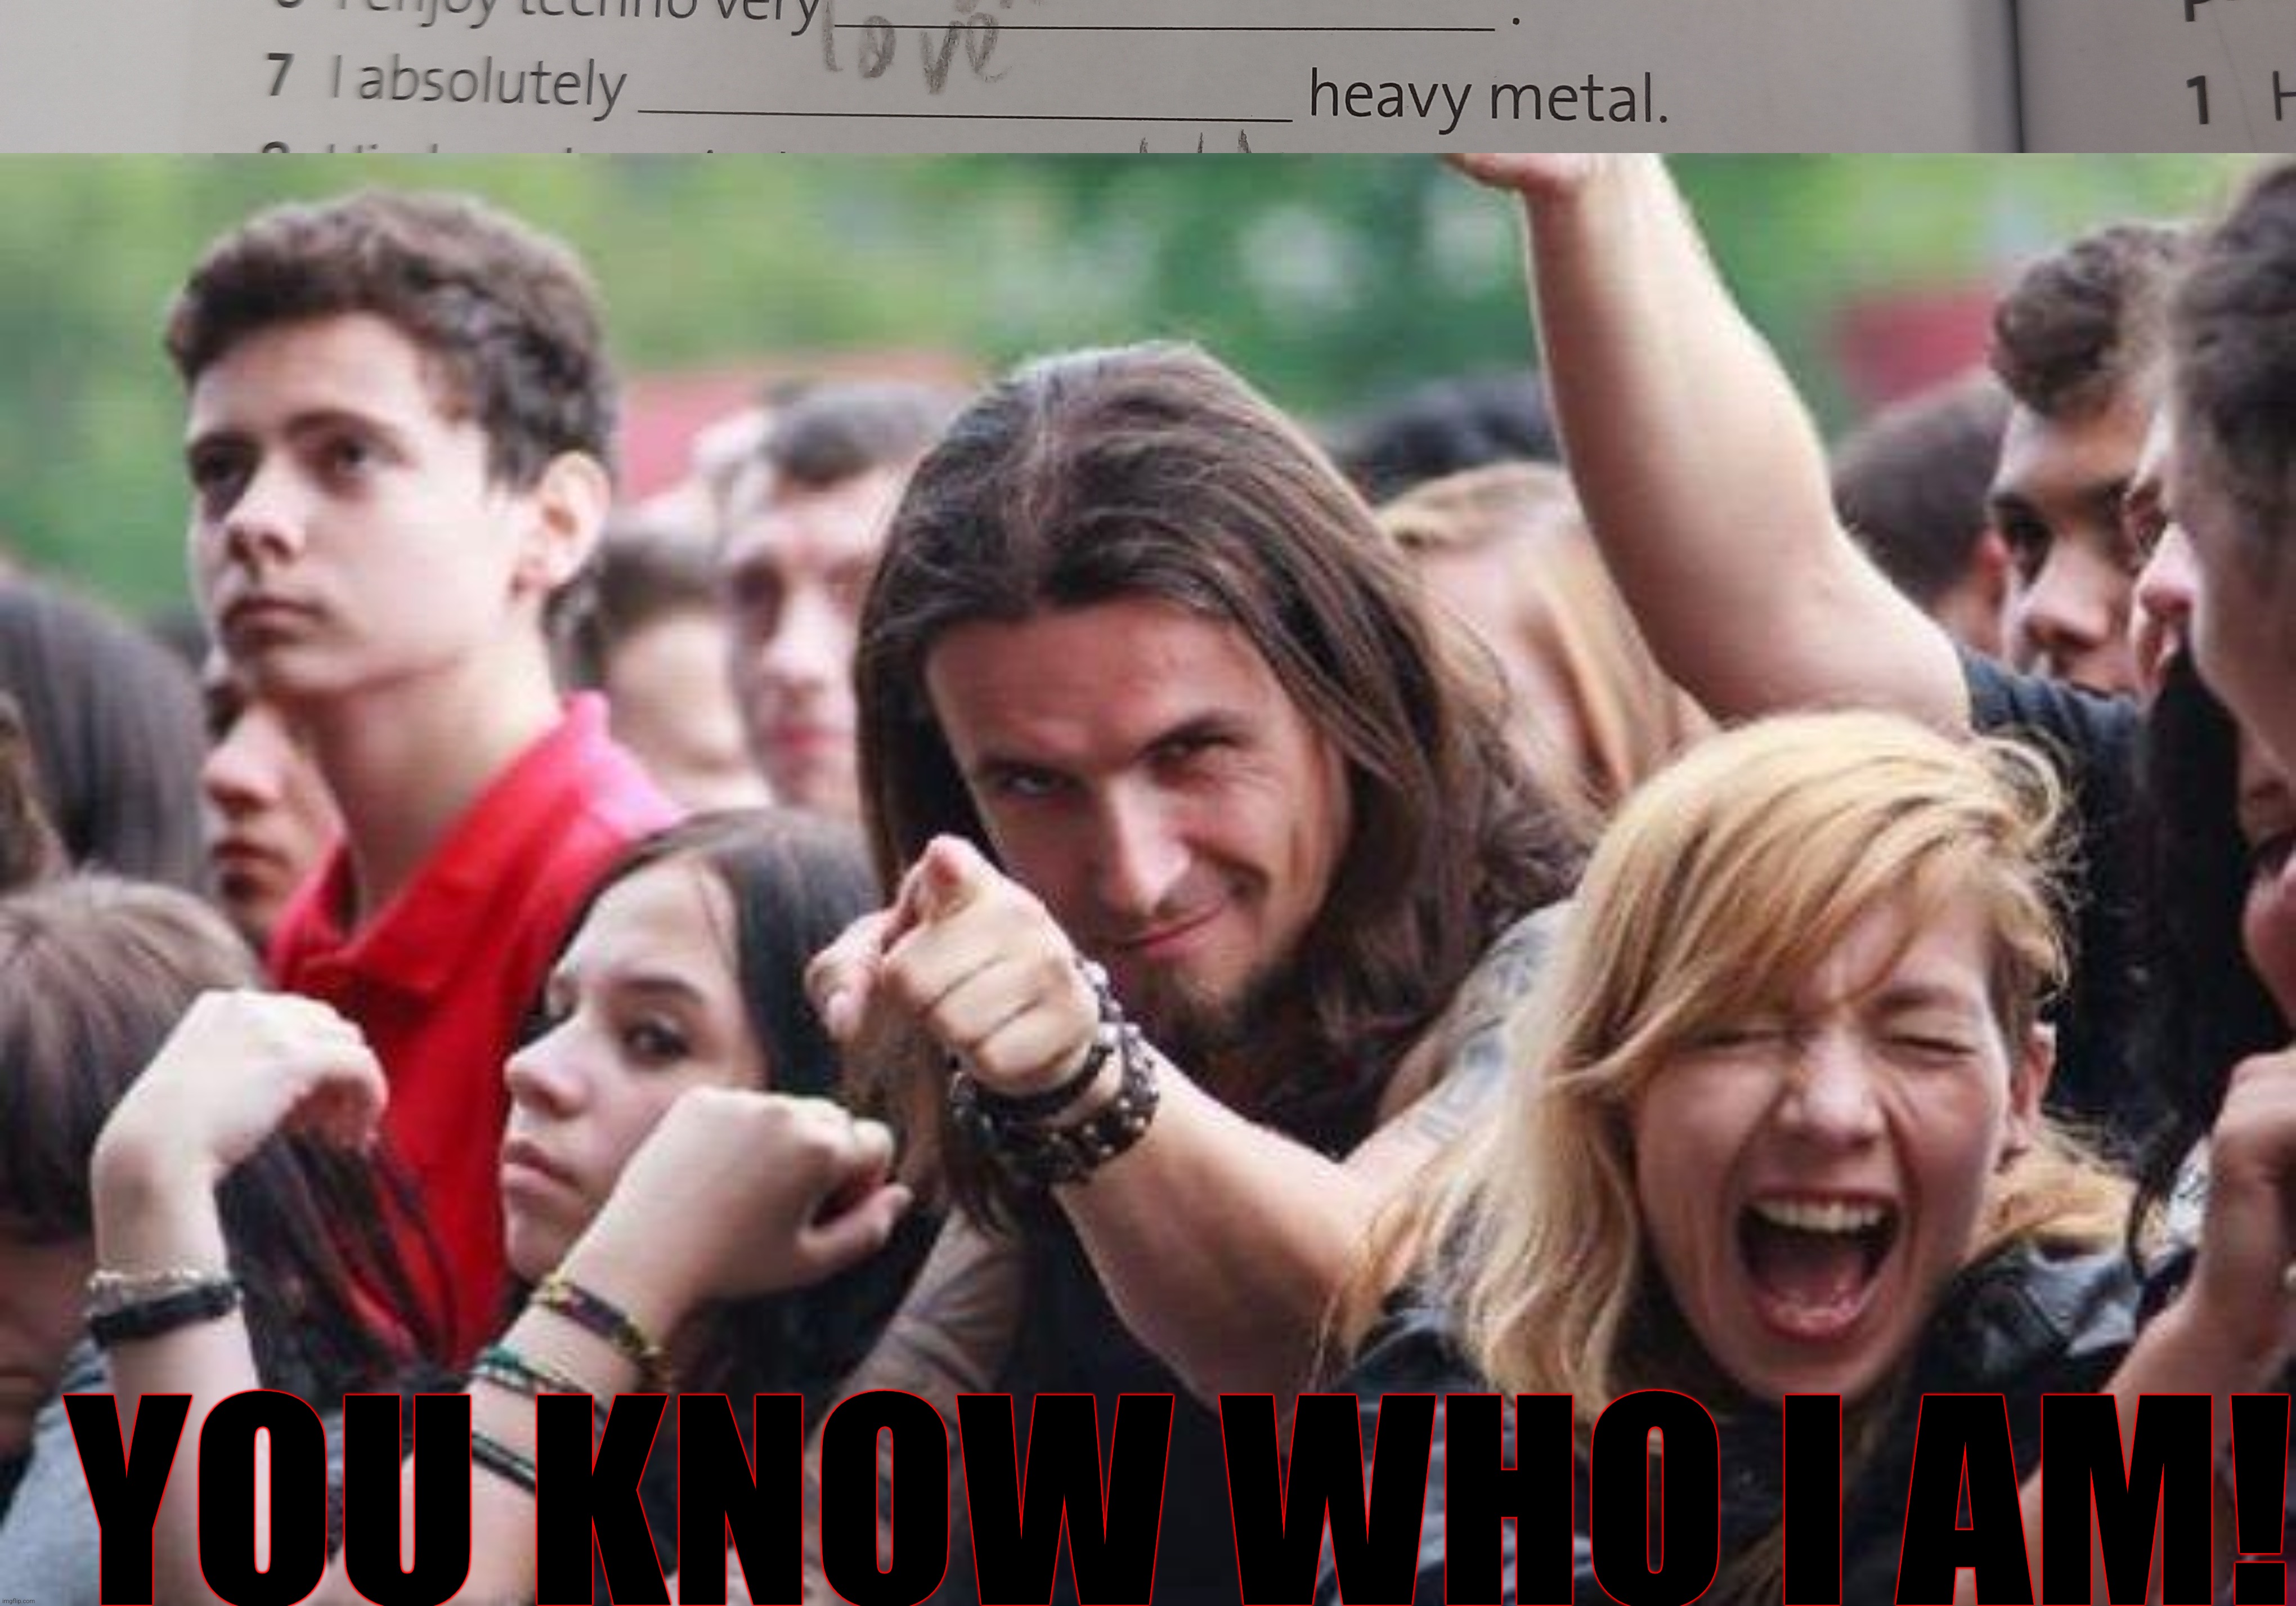 My old English student's book knows what genre I love | YOU KNOW WHO I AM! | image tagged in ridiculously photogenic metalhead | made w/ Imgflip meme maker